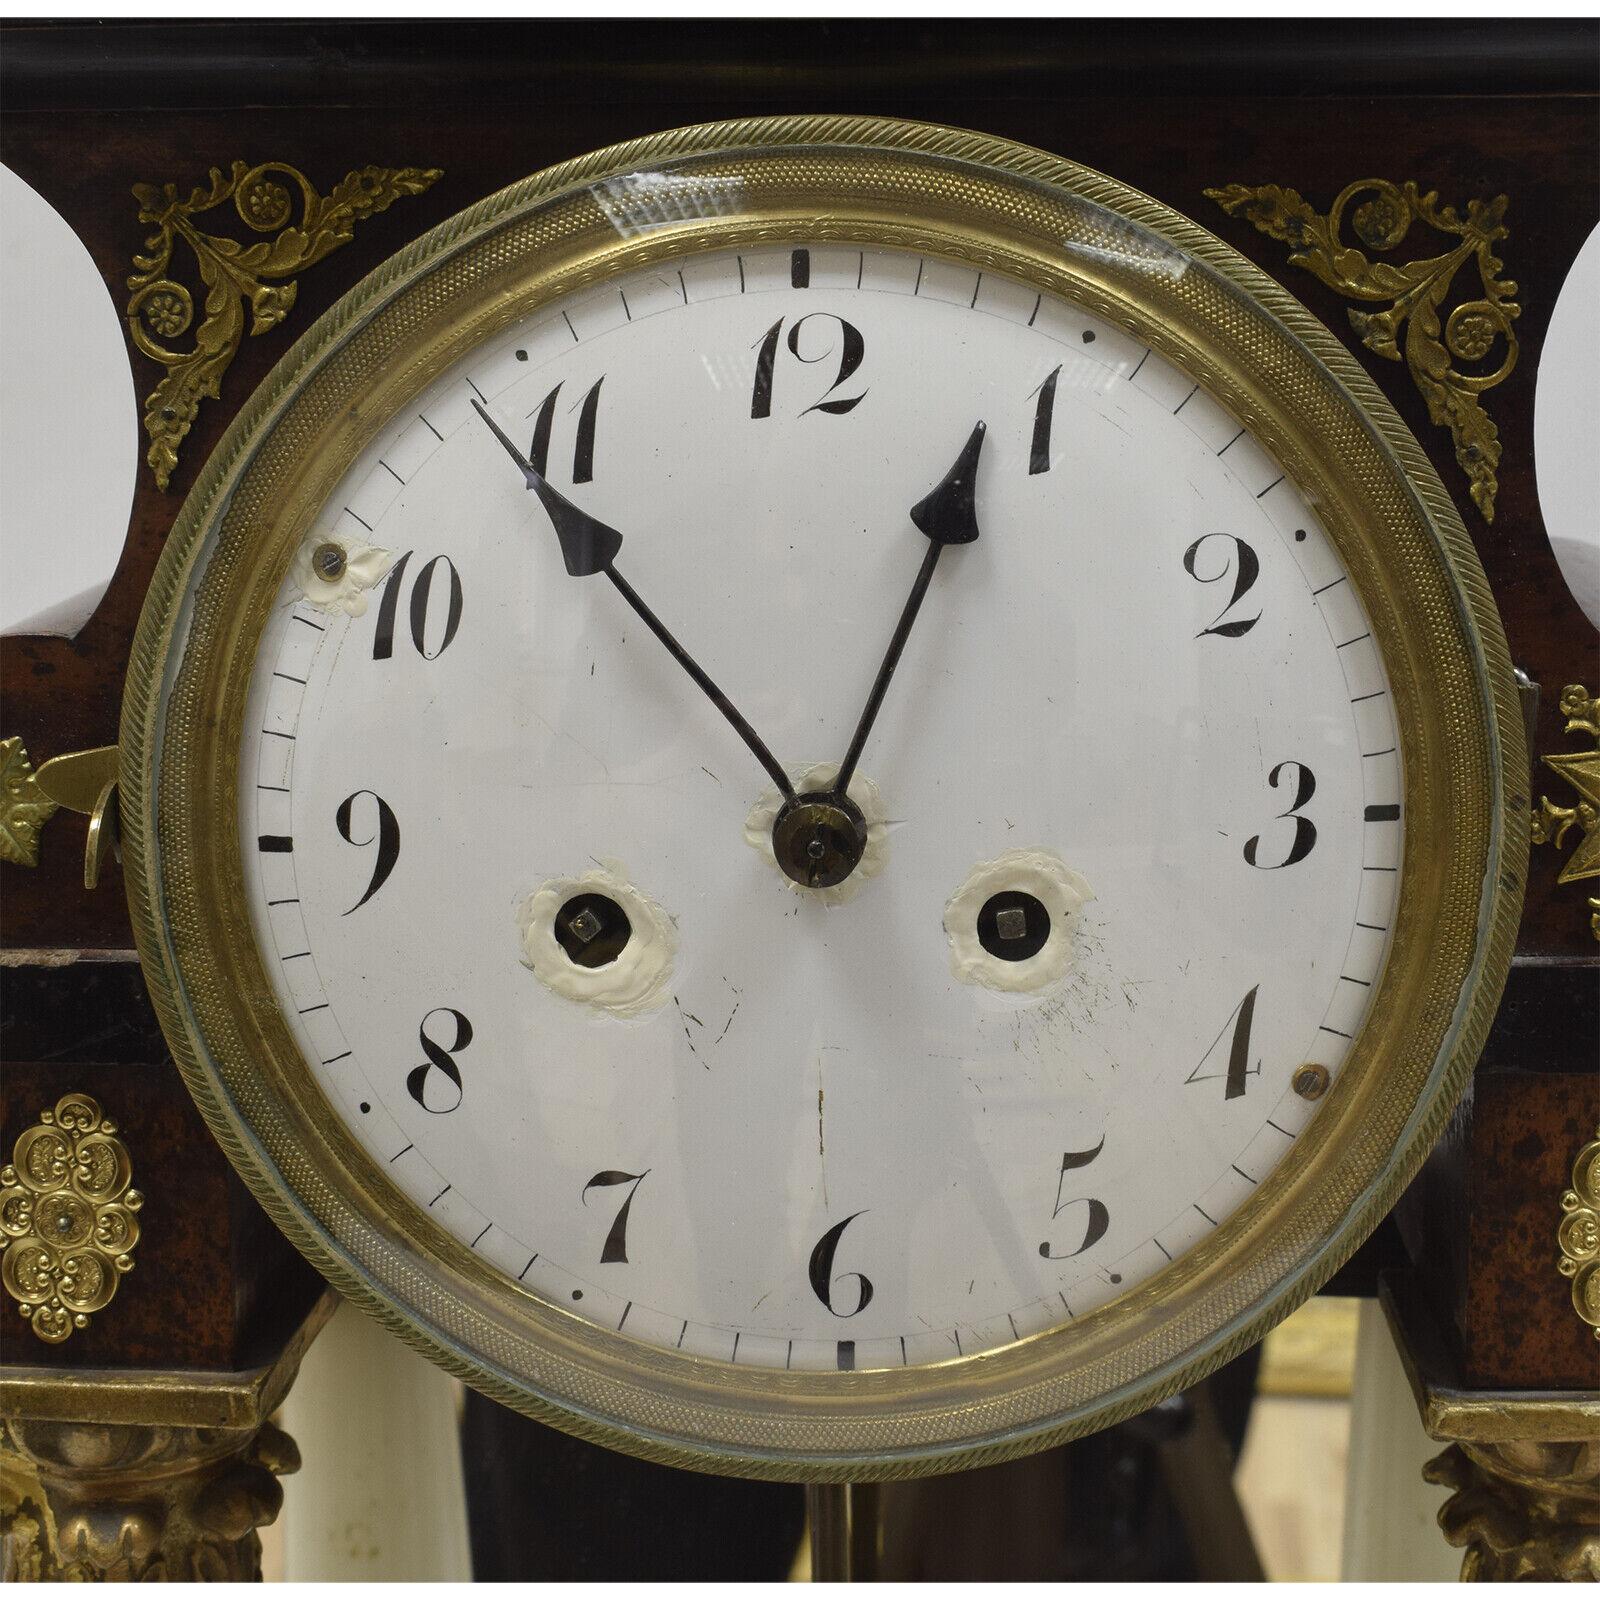 19th Century Functional Column Clock: Antique Mantel Clock with Portico, 1G05 For Sale 3